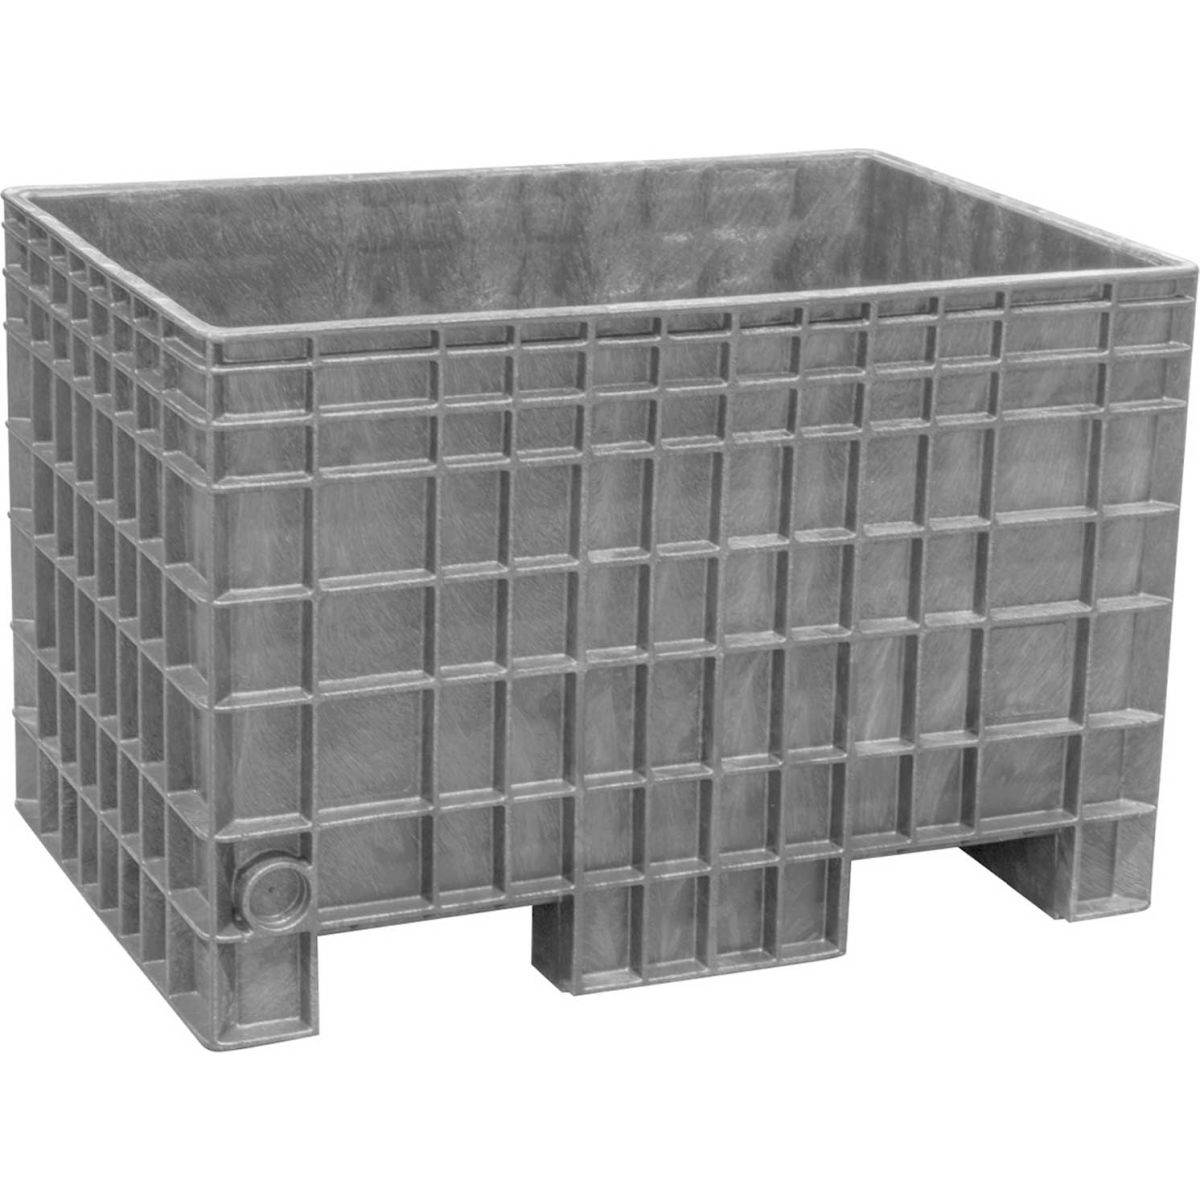 Picture of Akro-Mils 4710000 Buckhorn BF4229280051000 Agricultural Bulk Container - FDA Compliant - Light Gray - 42 x 29 x 28 in.